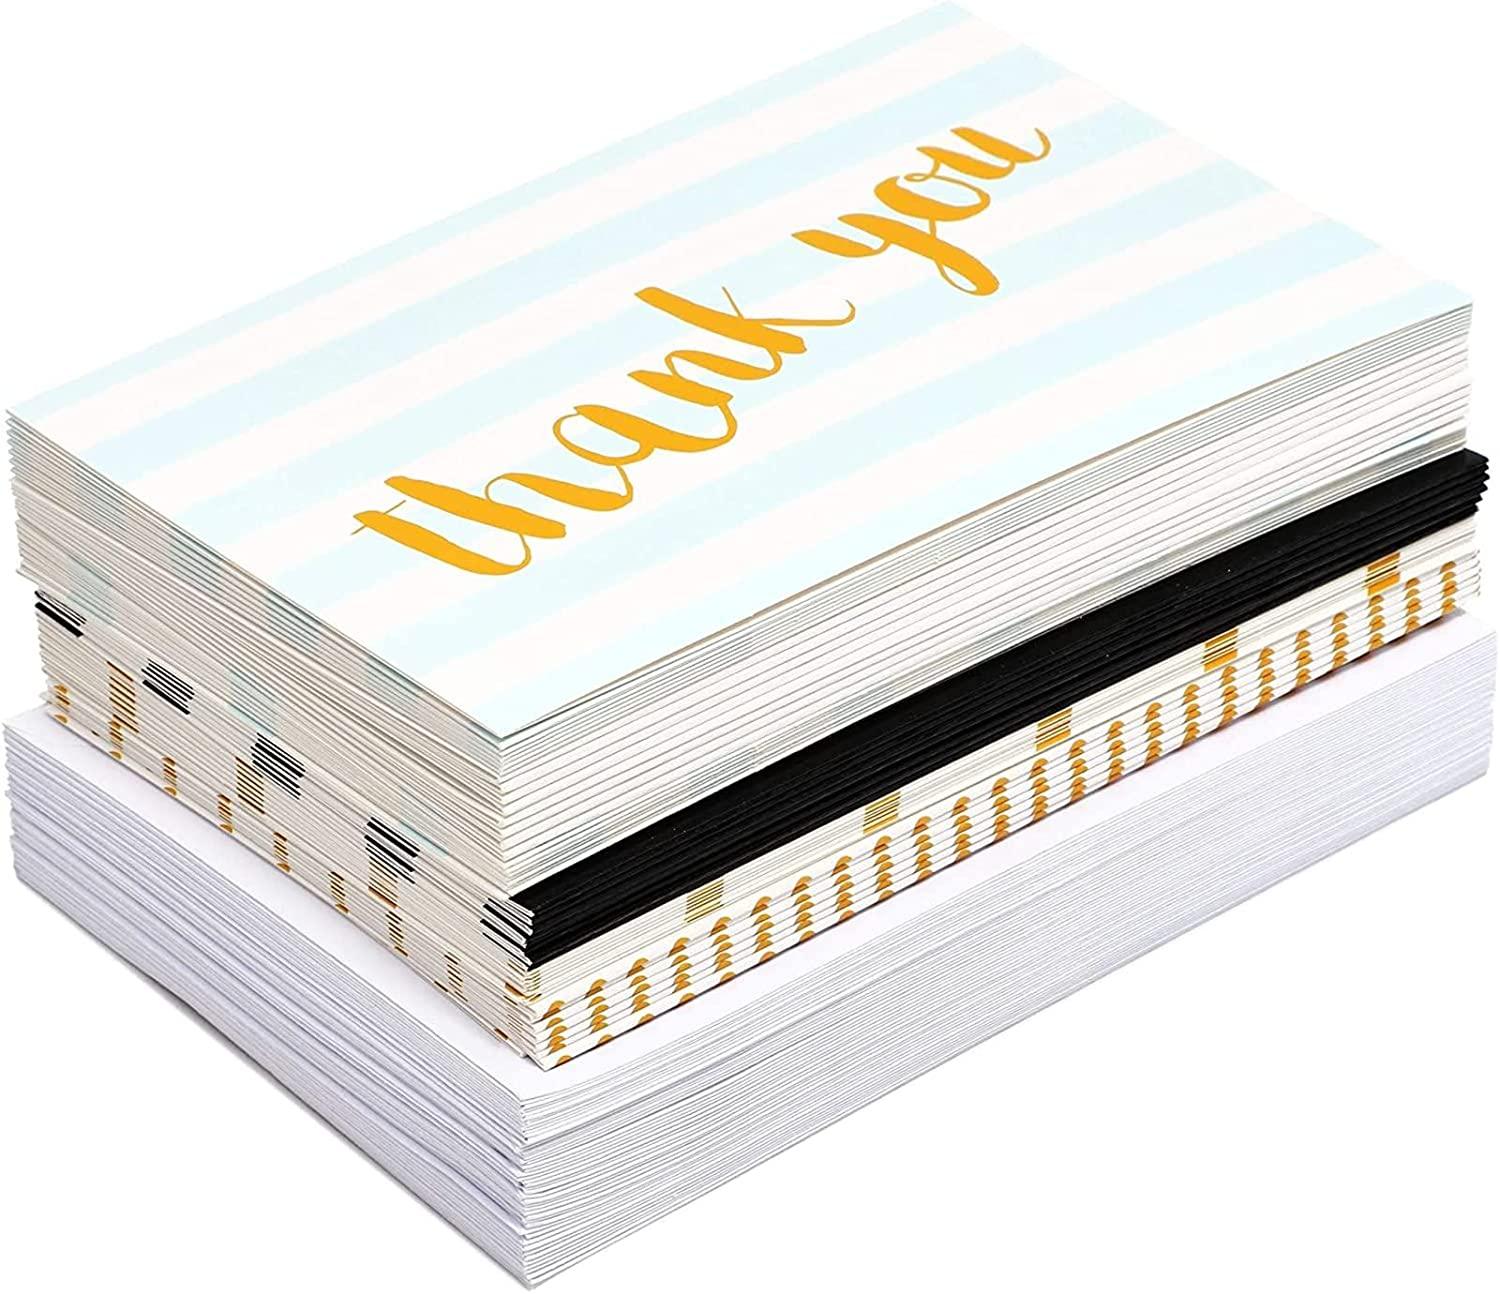 48-Pack Thank You Cards with Envelopes for Birthdays, Graduation, Wedding - Lasercutwraps Shop